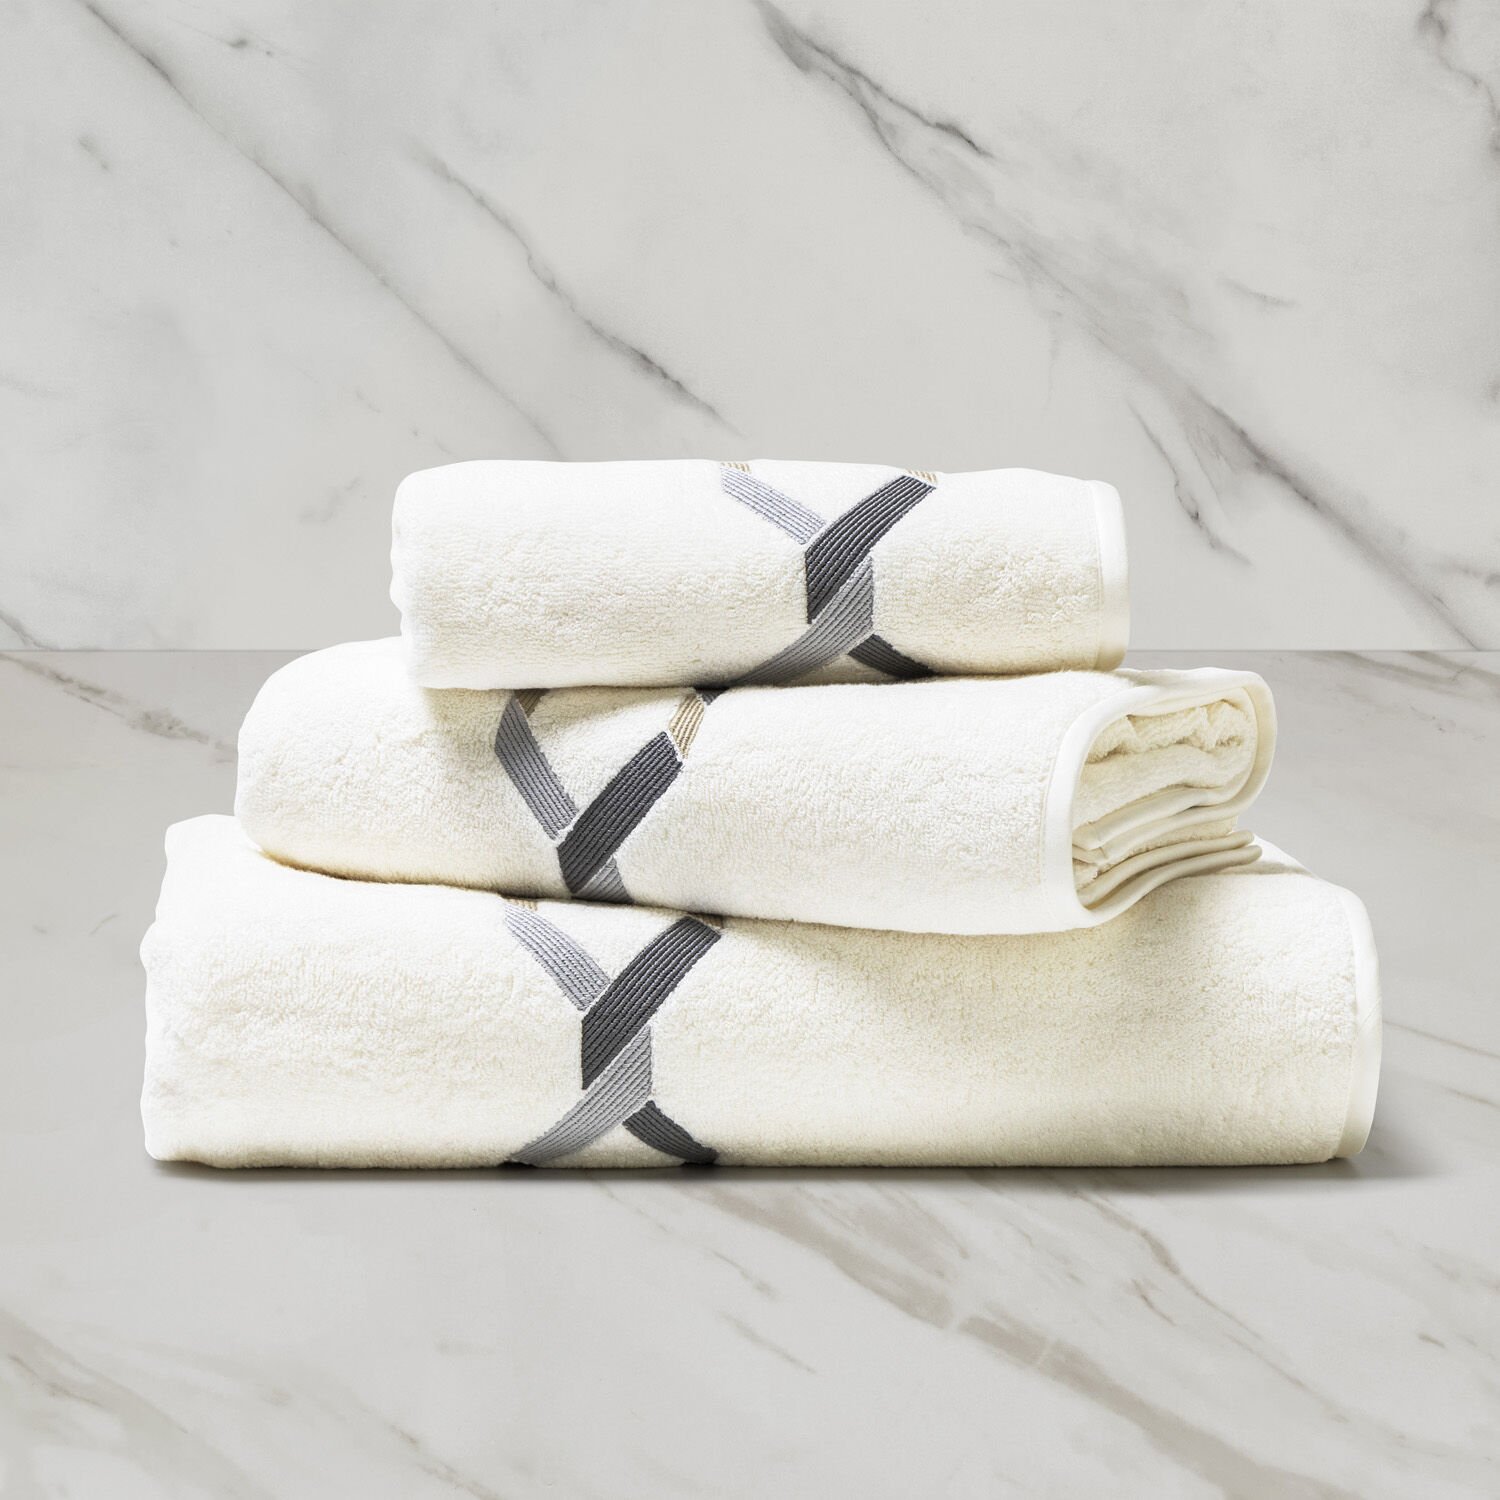 Frette Continuity Embroidered Bath Towel in Grey/Savage Beige, Cotton Sateen | Made in Italy